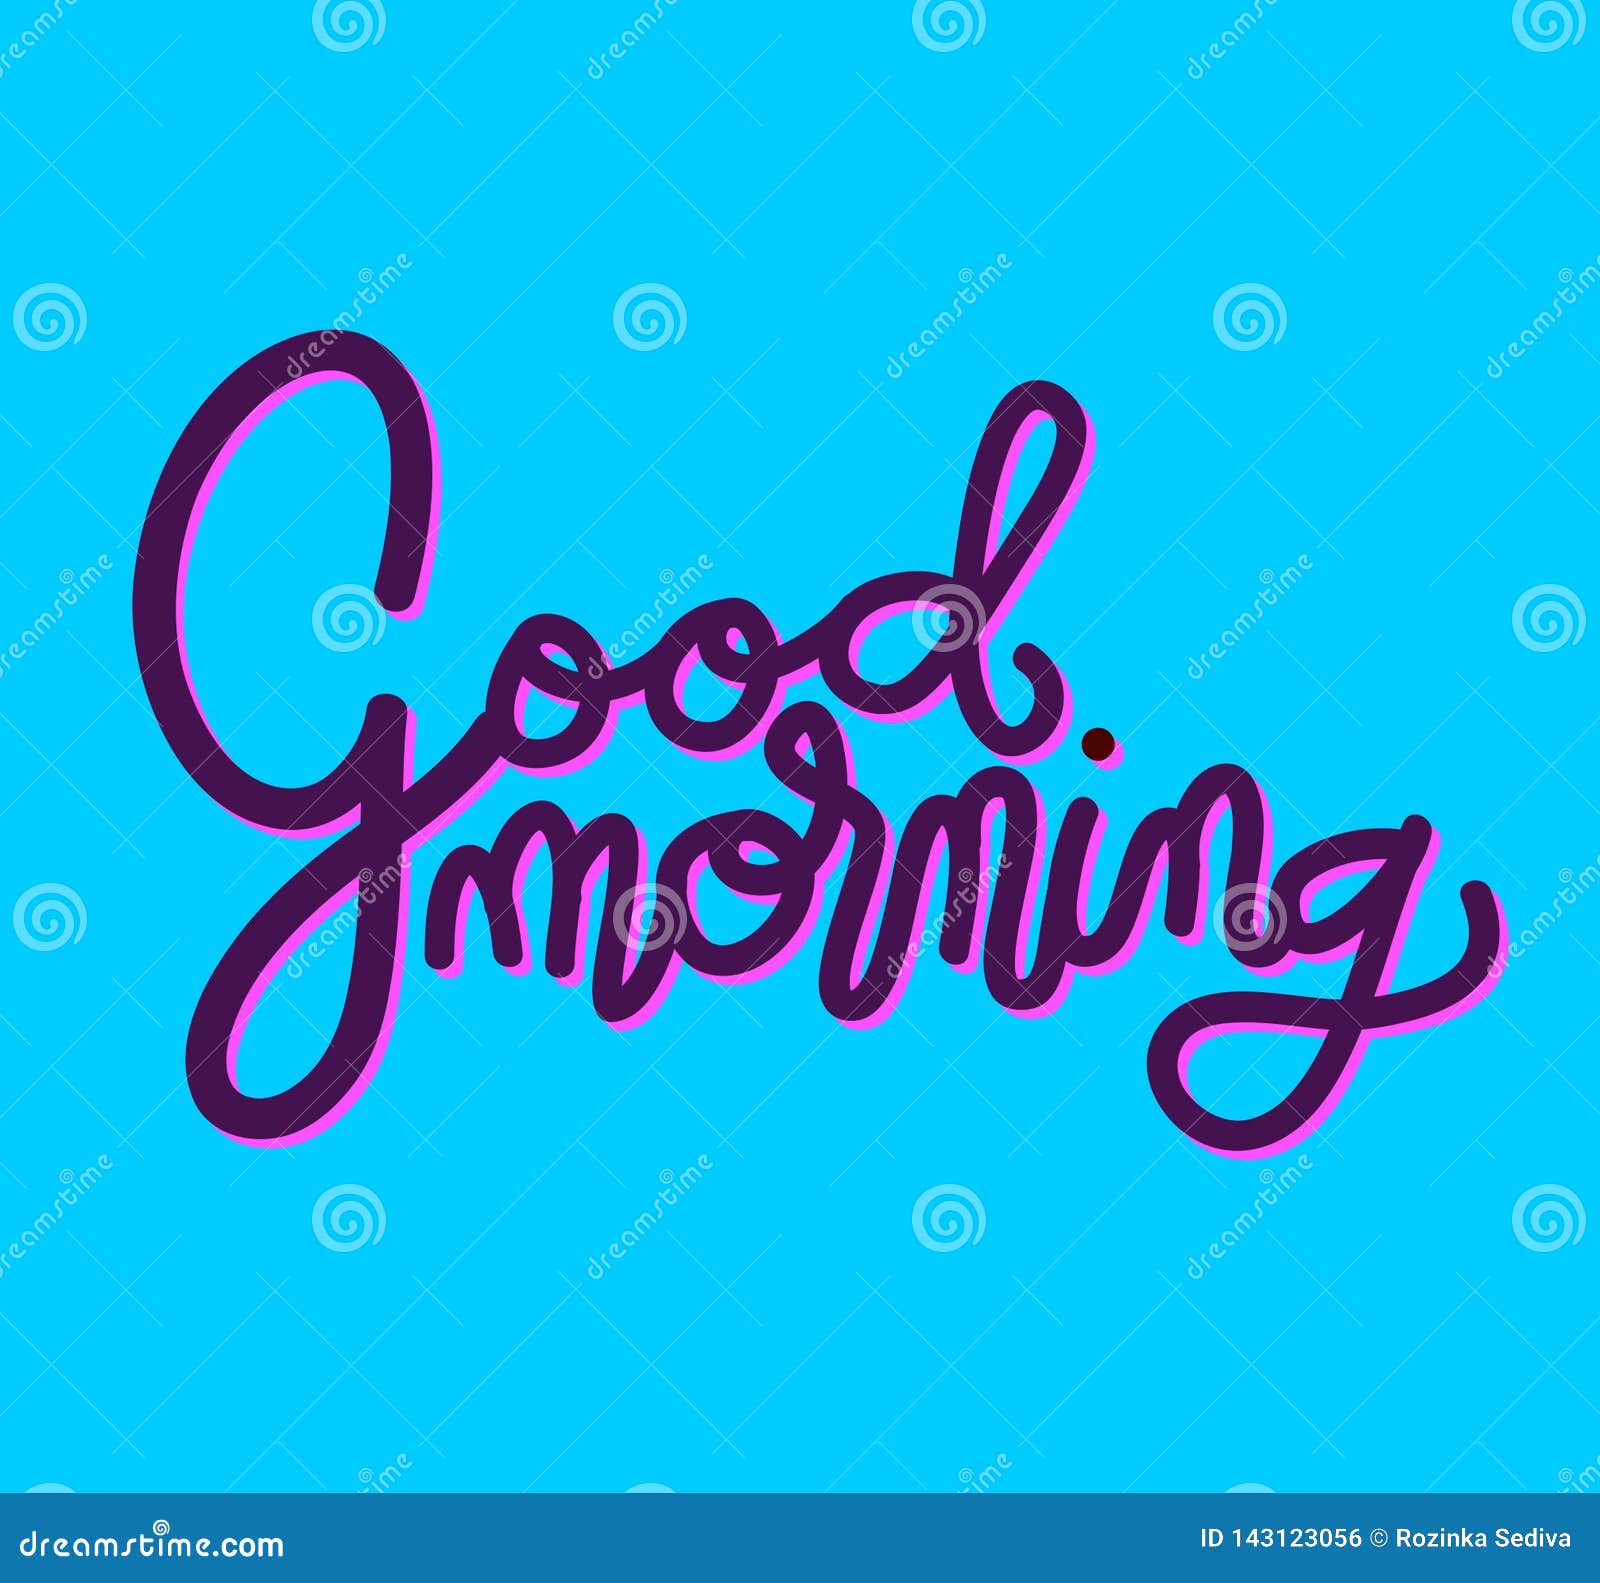 Sign Good Morning, Template Poster Hand Drawn. Vector. Stock Vector ...